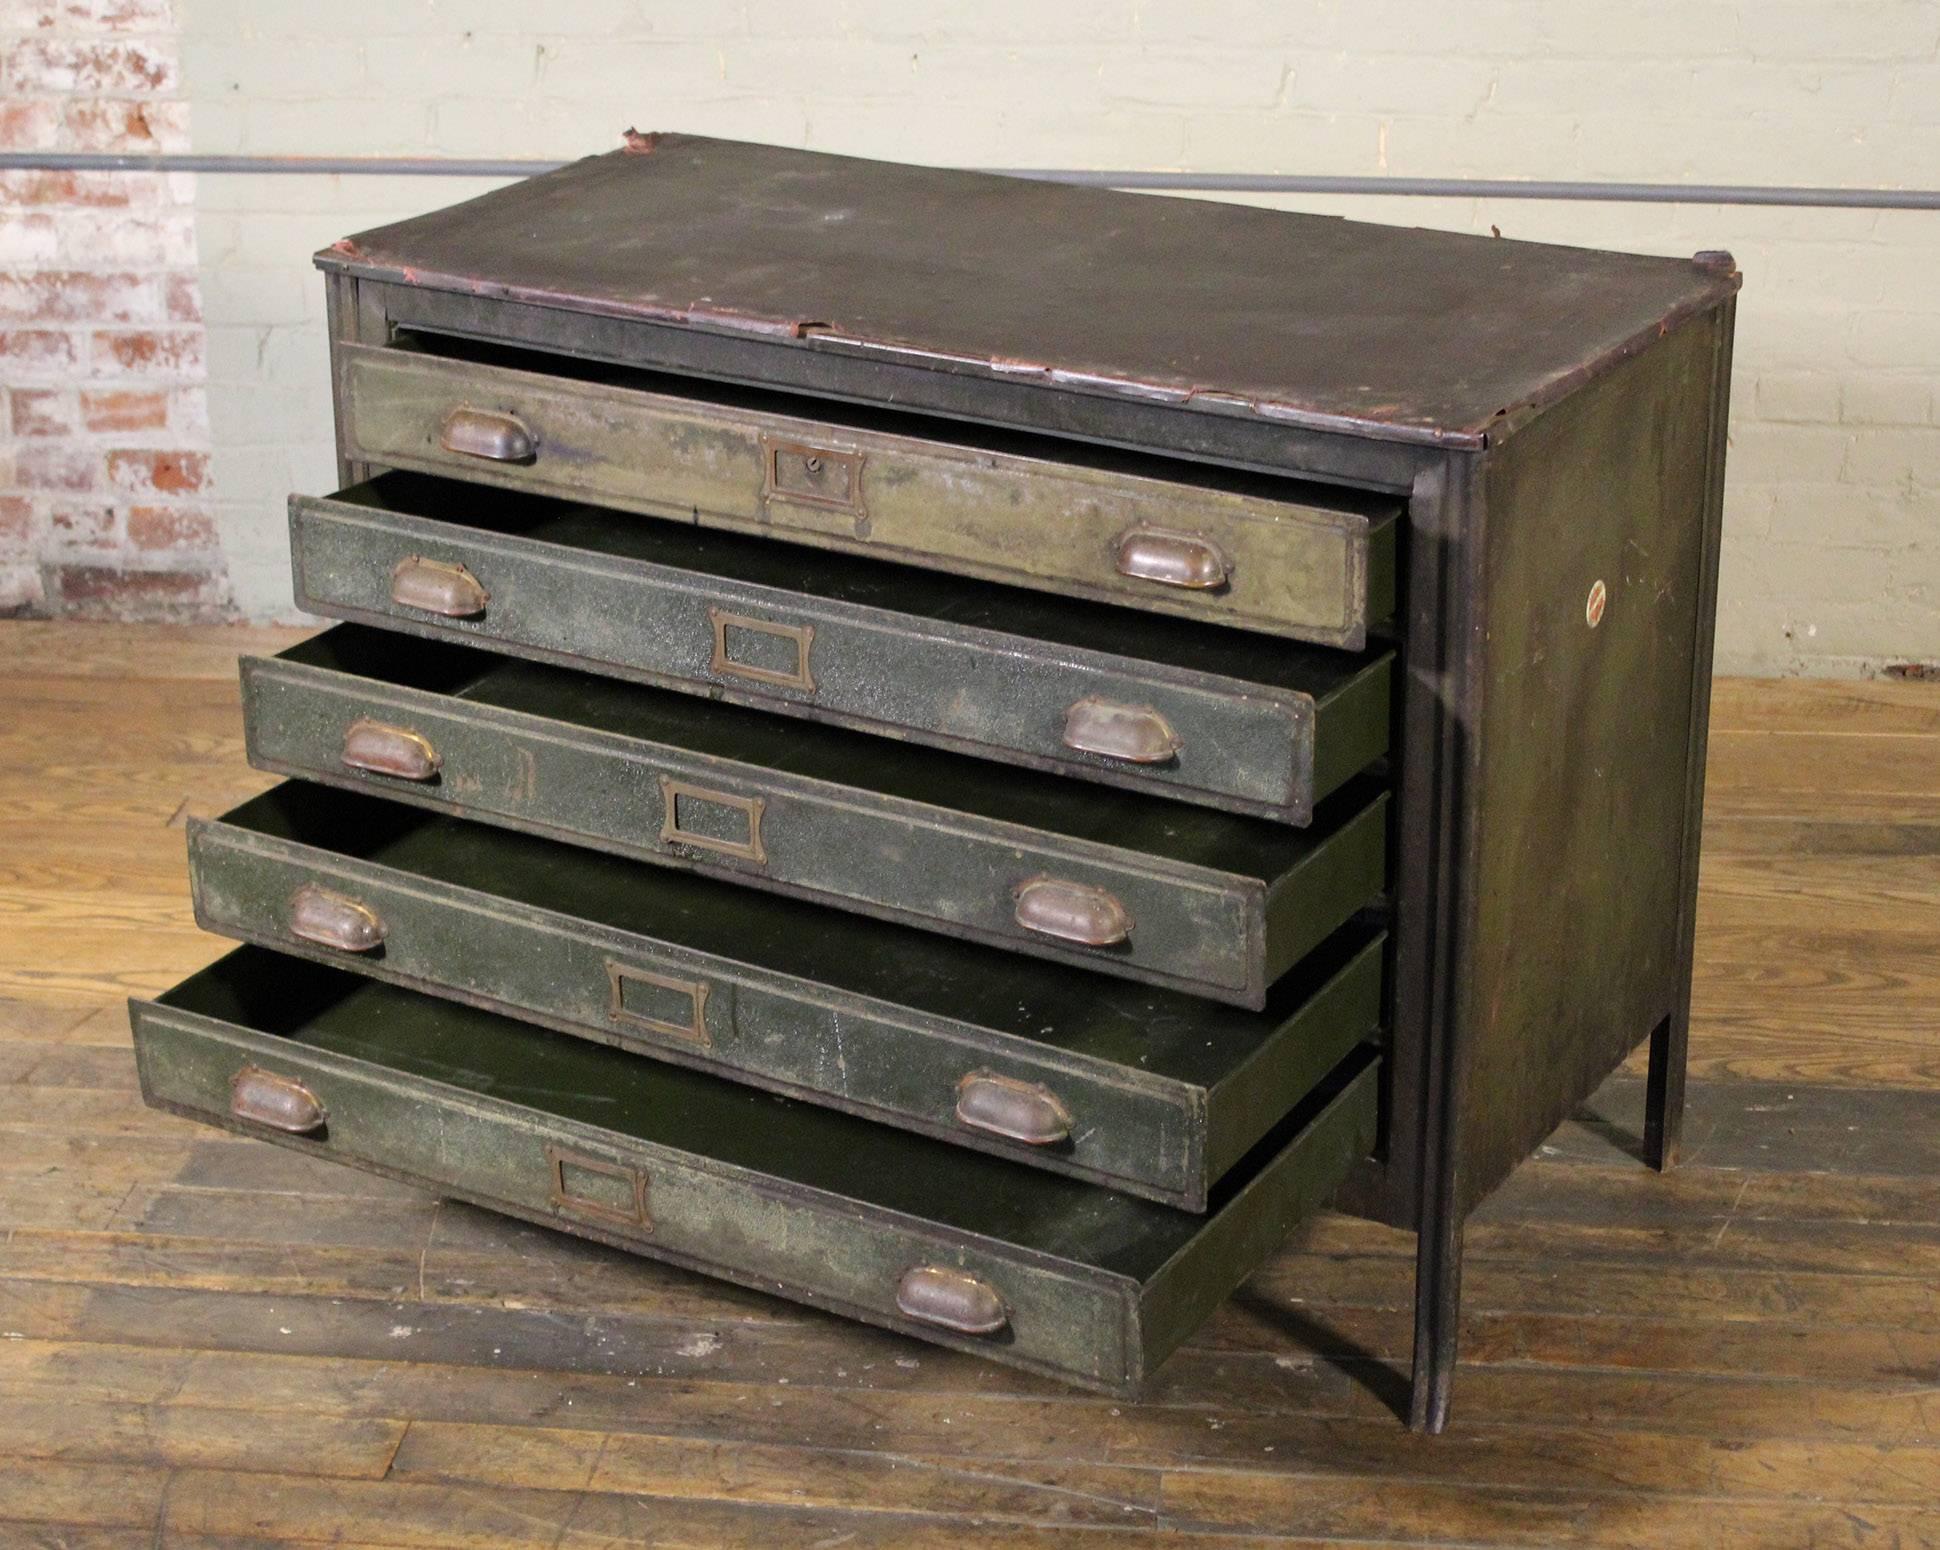 Vintage Industrial distressed metal five-drawer lateral flat file storage cabinet or table with worn leather top and copper hardware. Top measures 41